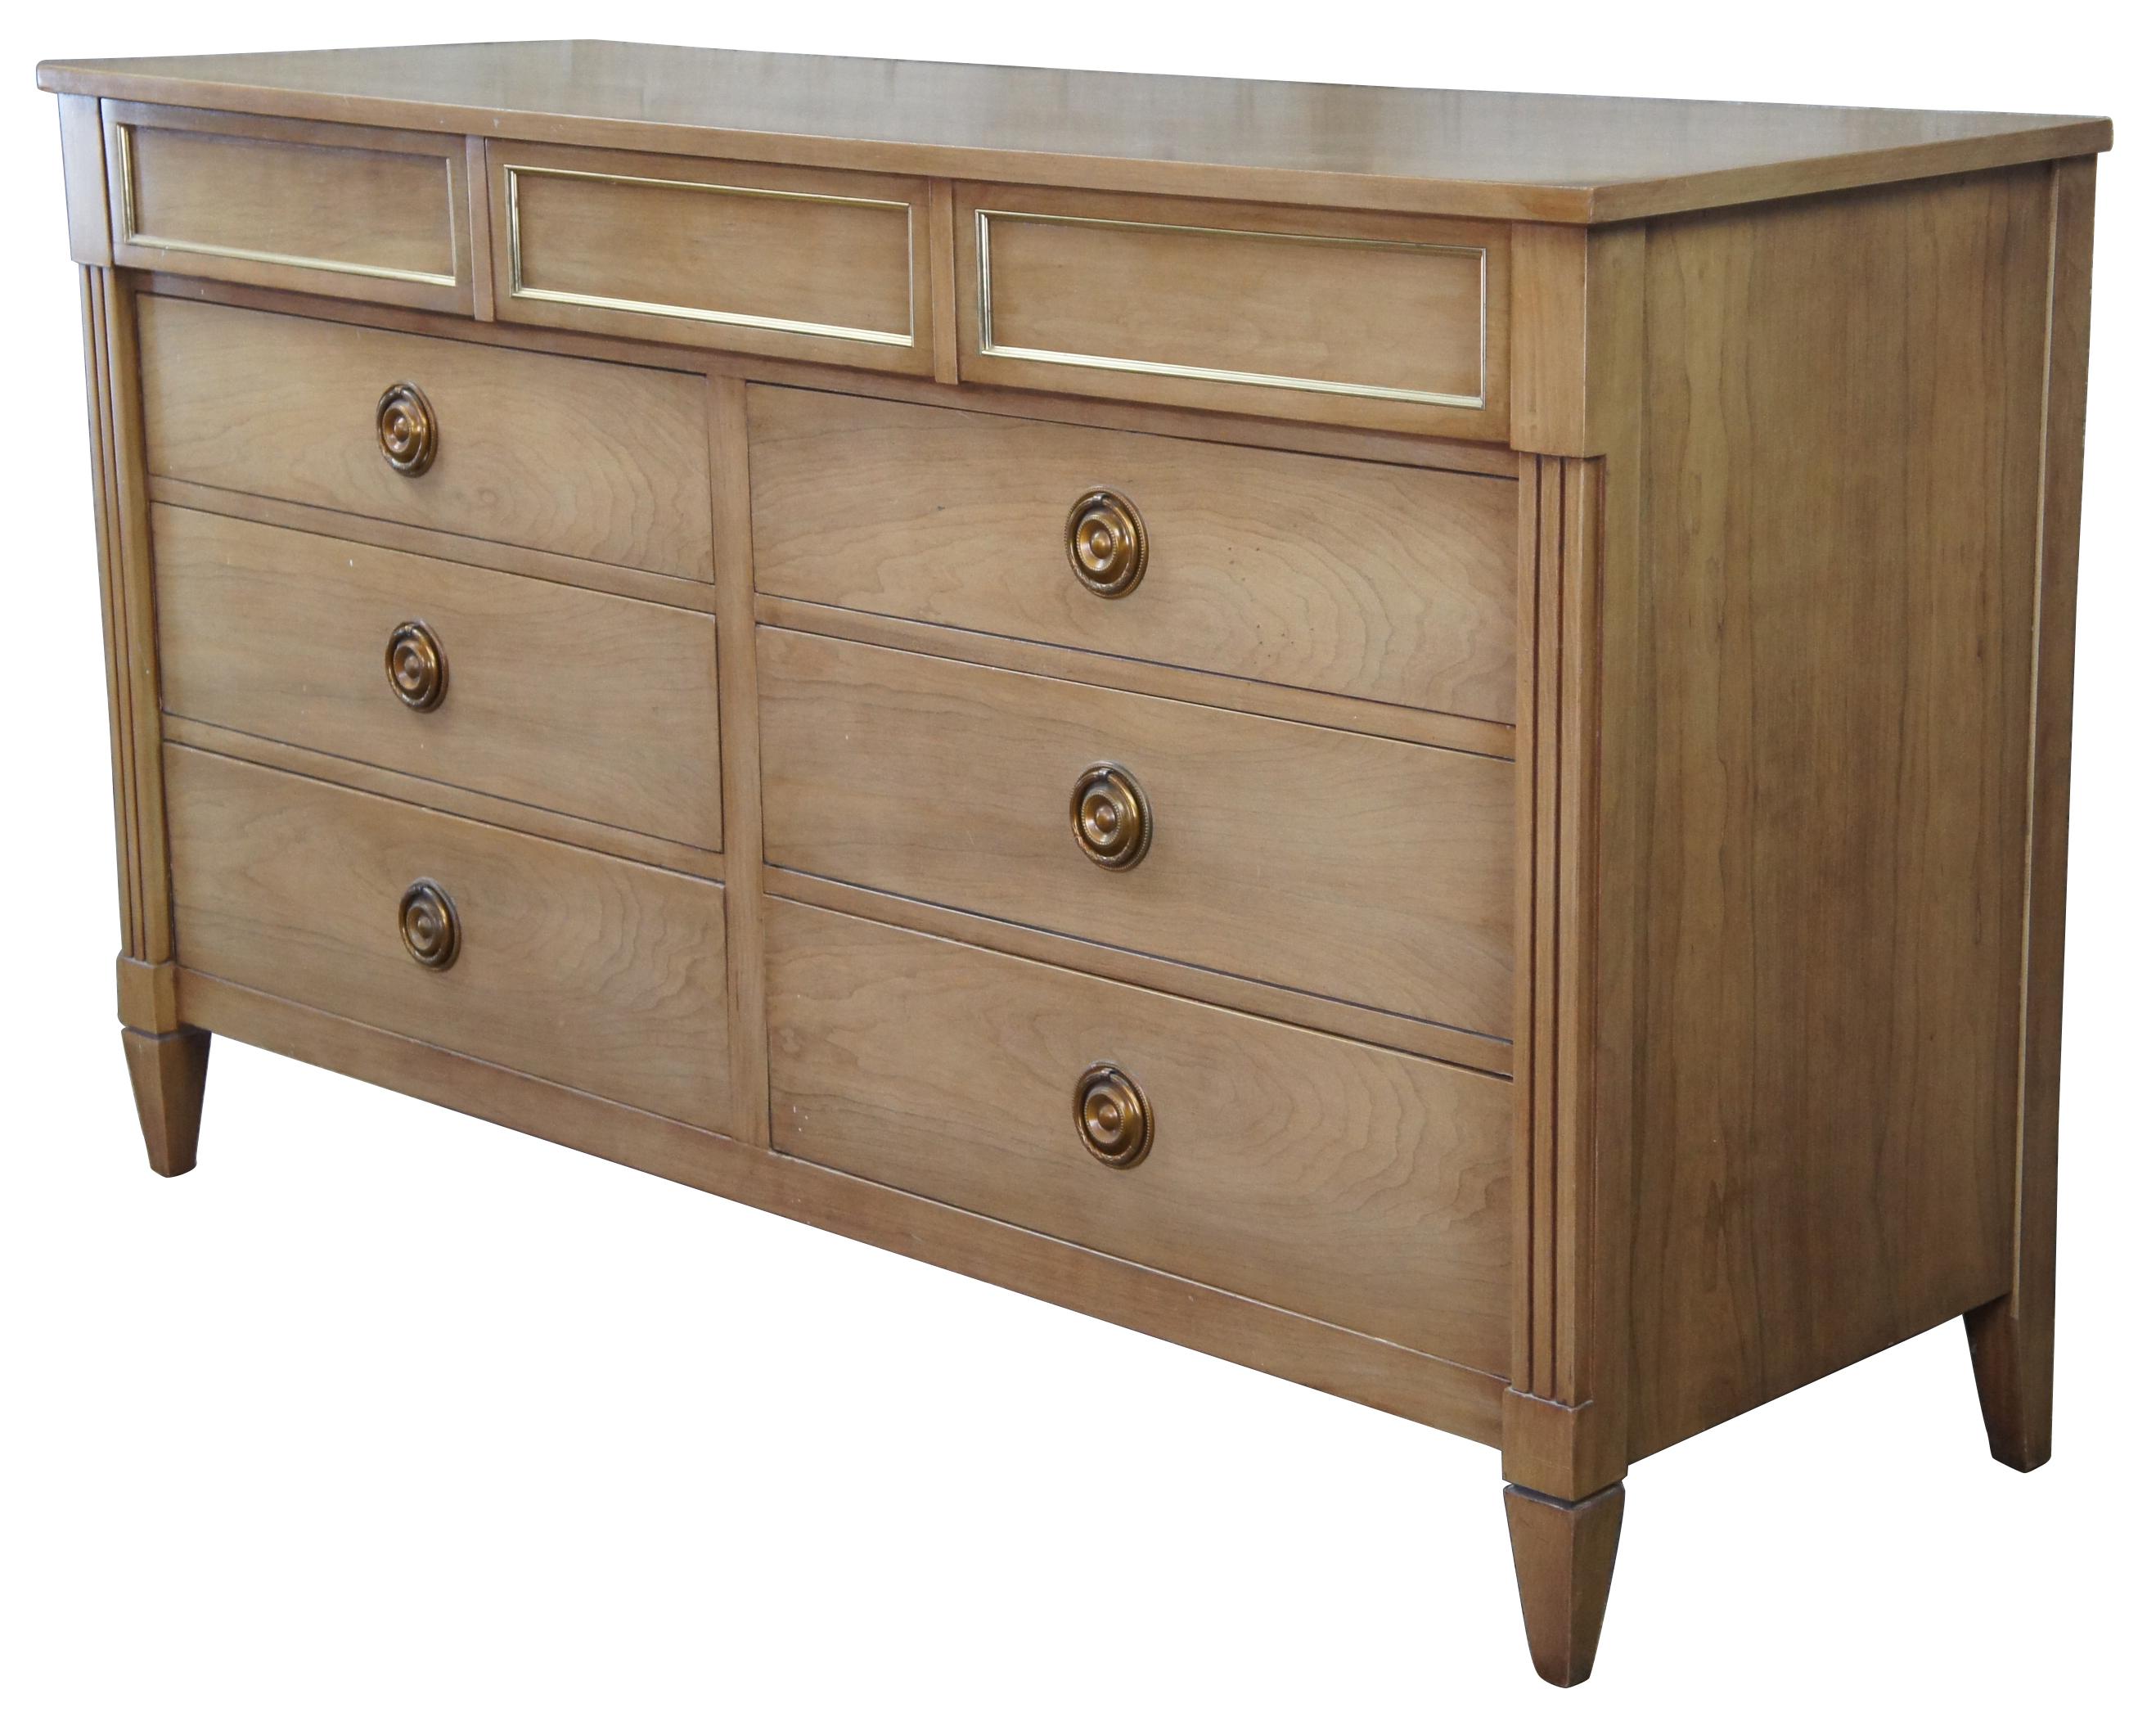 Vintage National Furniture Company double dresser. Made of walnut featuring Louis XVI styling with nine drawers and neoclassical hardware. Made in Mt. Airy, North Carolina.
  